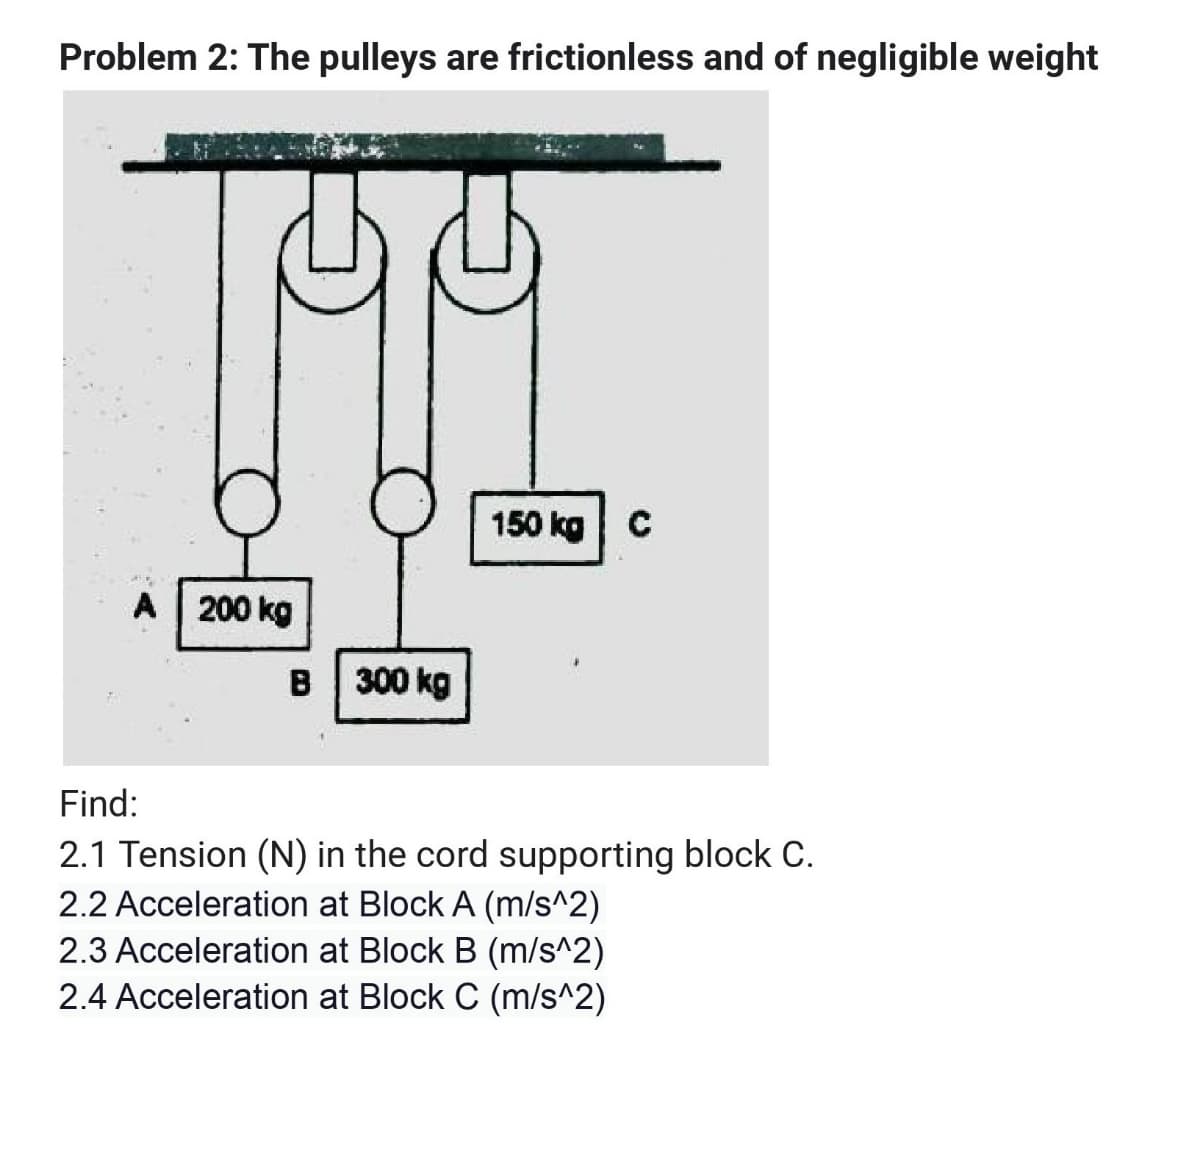 Problem 2: The pulleys are frictionless and of negligible weight
150 kg C
A | 200 kg
B 300 kg
Find:
2.1 Tension (N) in the cord supporting block C.
2.2 Acceleration at Block A (m/s^2)
2.3 Acceleration at Block B (m/s^2)
2.4 Acceleration at Block C (m/s^2)
